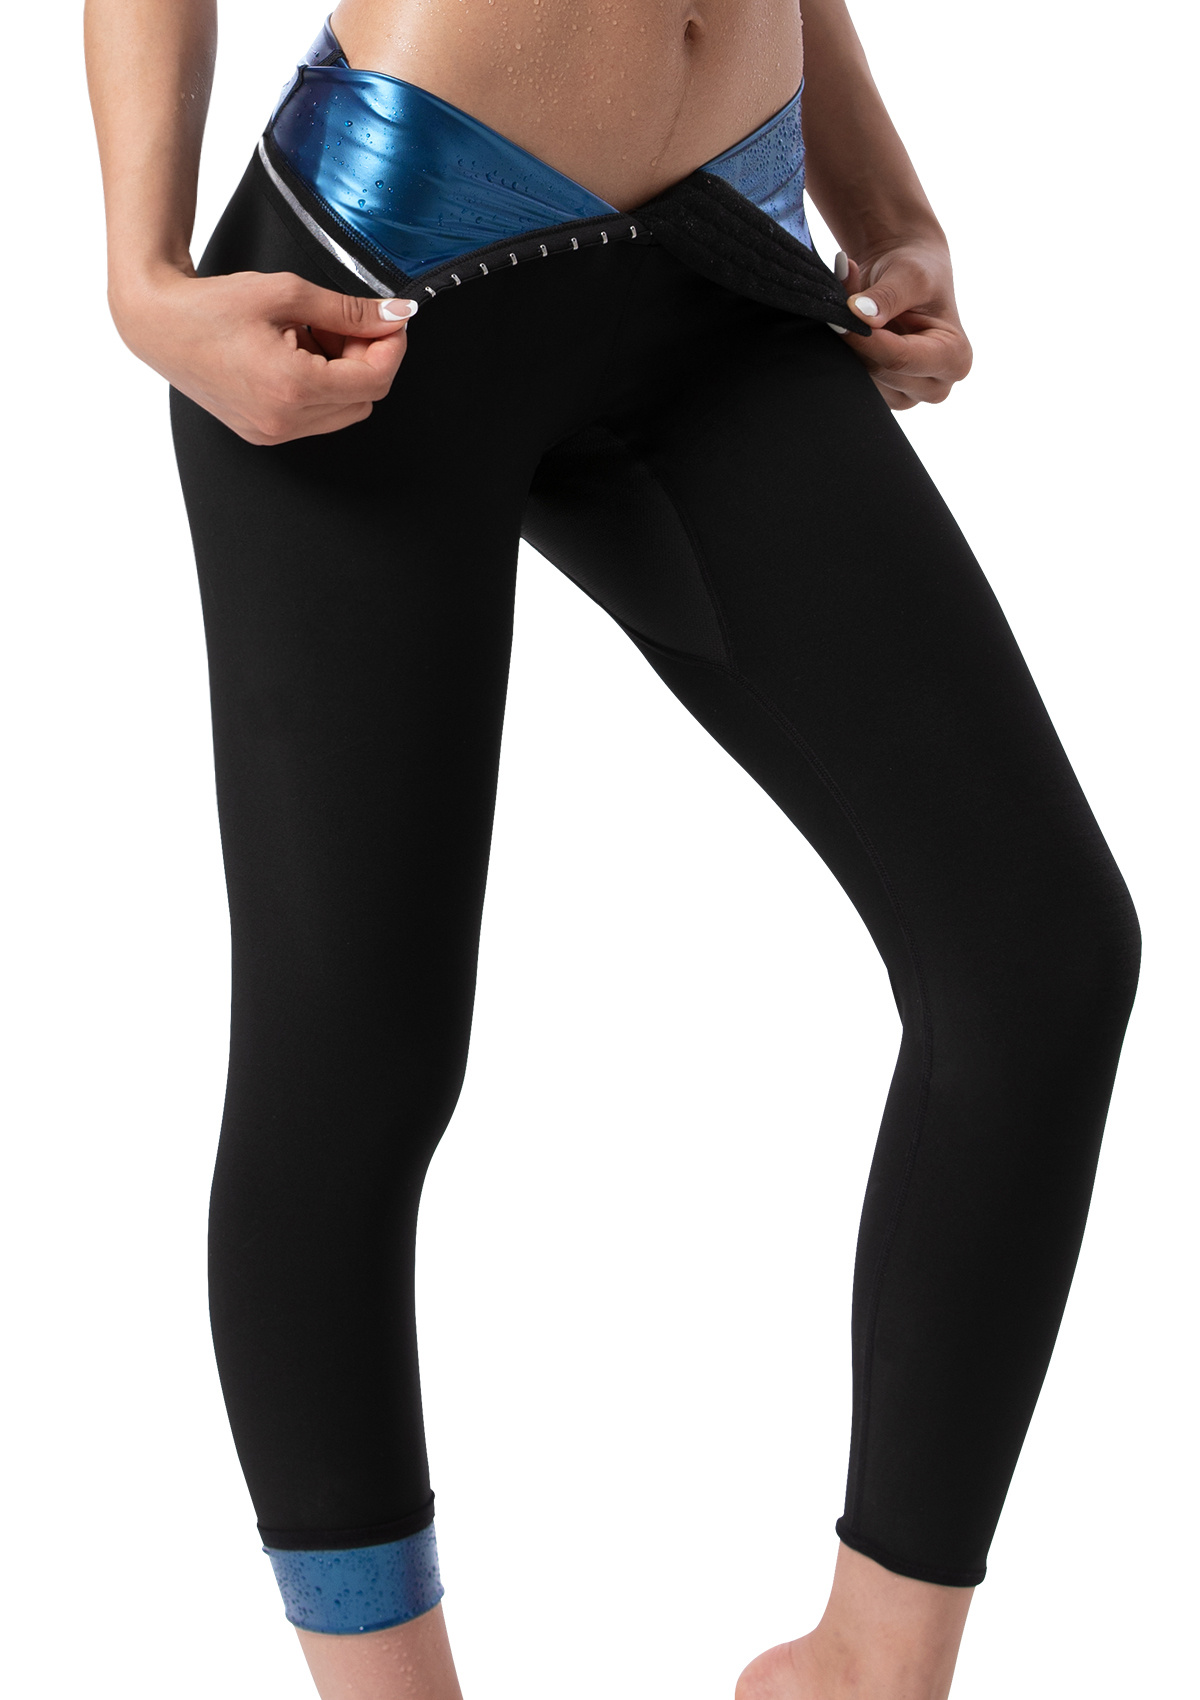 Sweat Shaper Trainer Tights: Slimming Compression Trainer Leggings for  Women, Body Shaping, Waist, Thigh & Glutes Black at  Women's Clothing  store